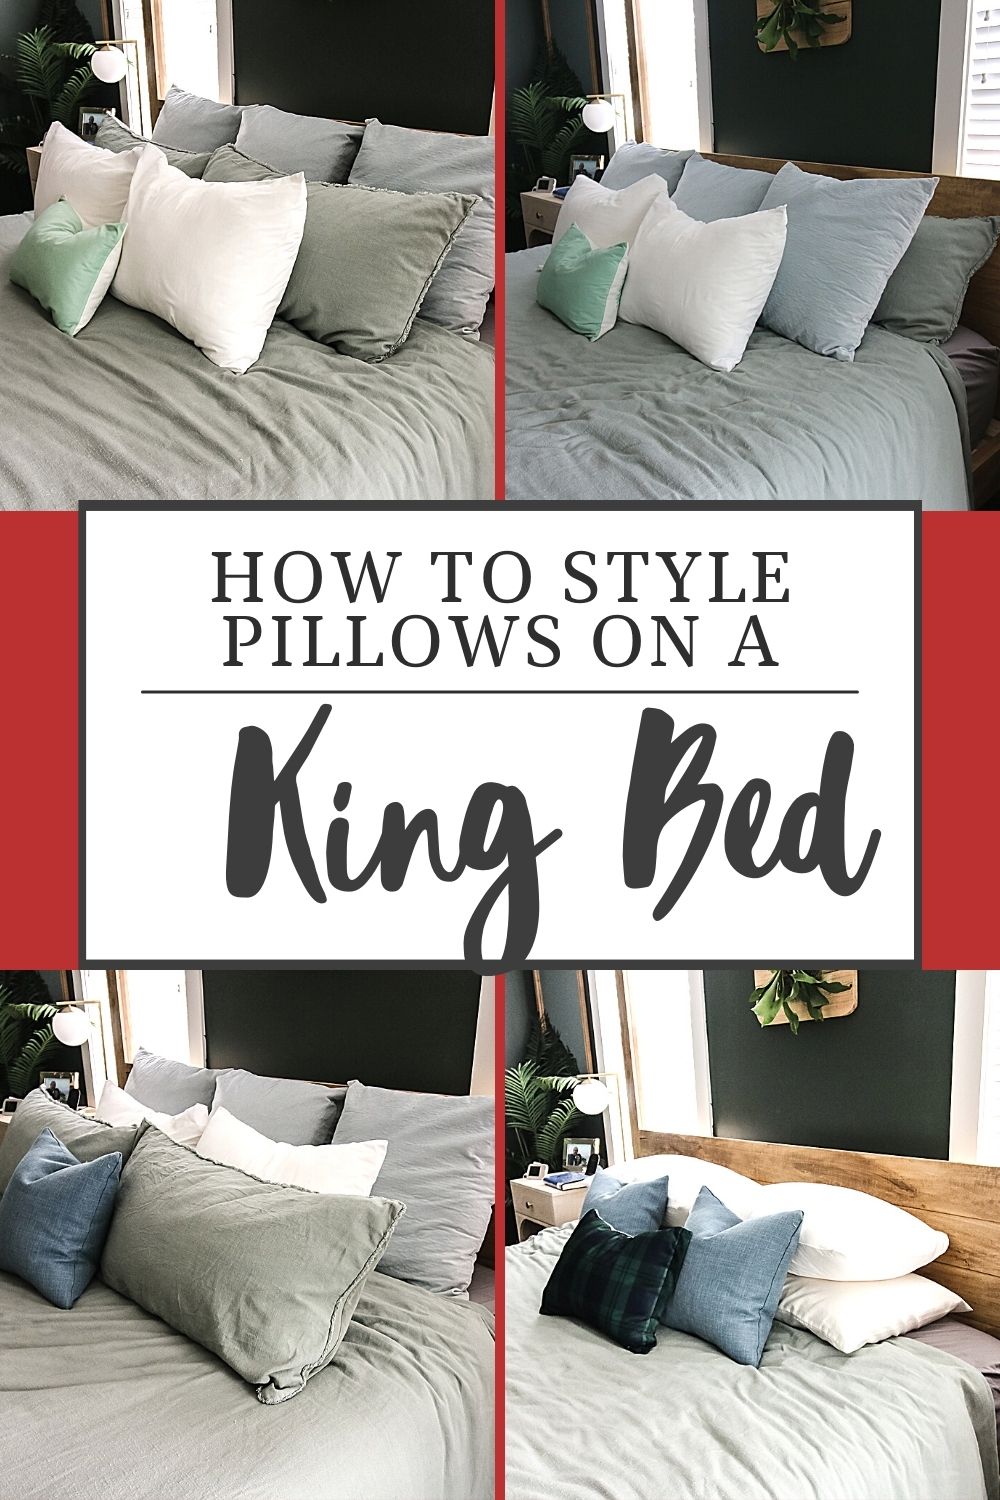 https://www.charlestoncrafted.com/wp-content/uploads/2022/09/how-to-style-pillows-on-a-king-bed.jpg